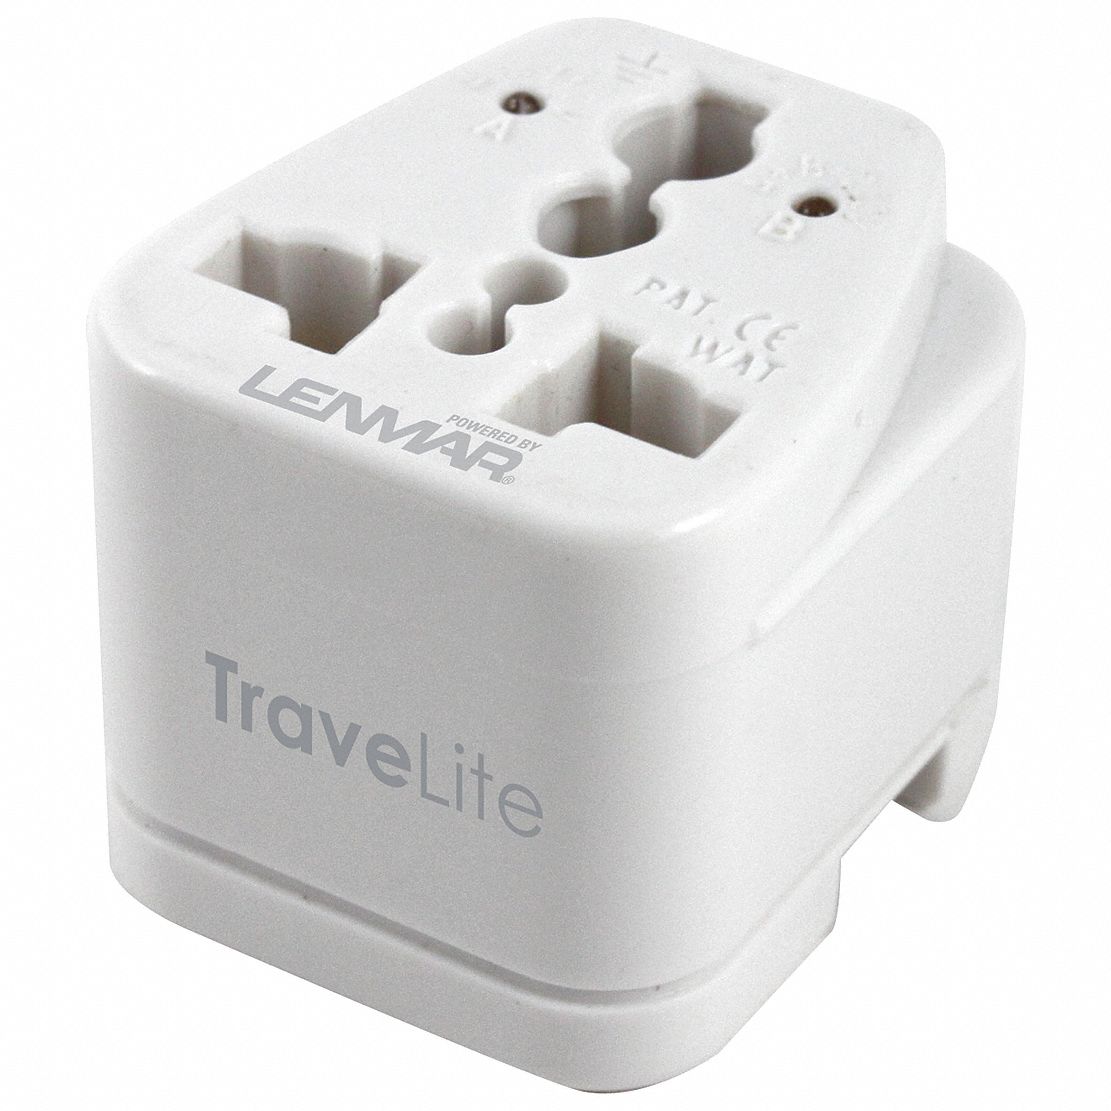 12A595 - All-in-One AC World Travel Converter